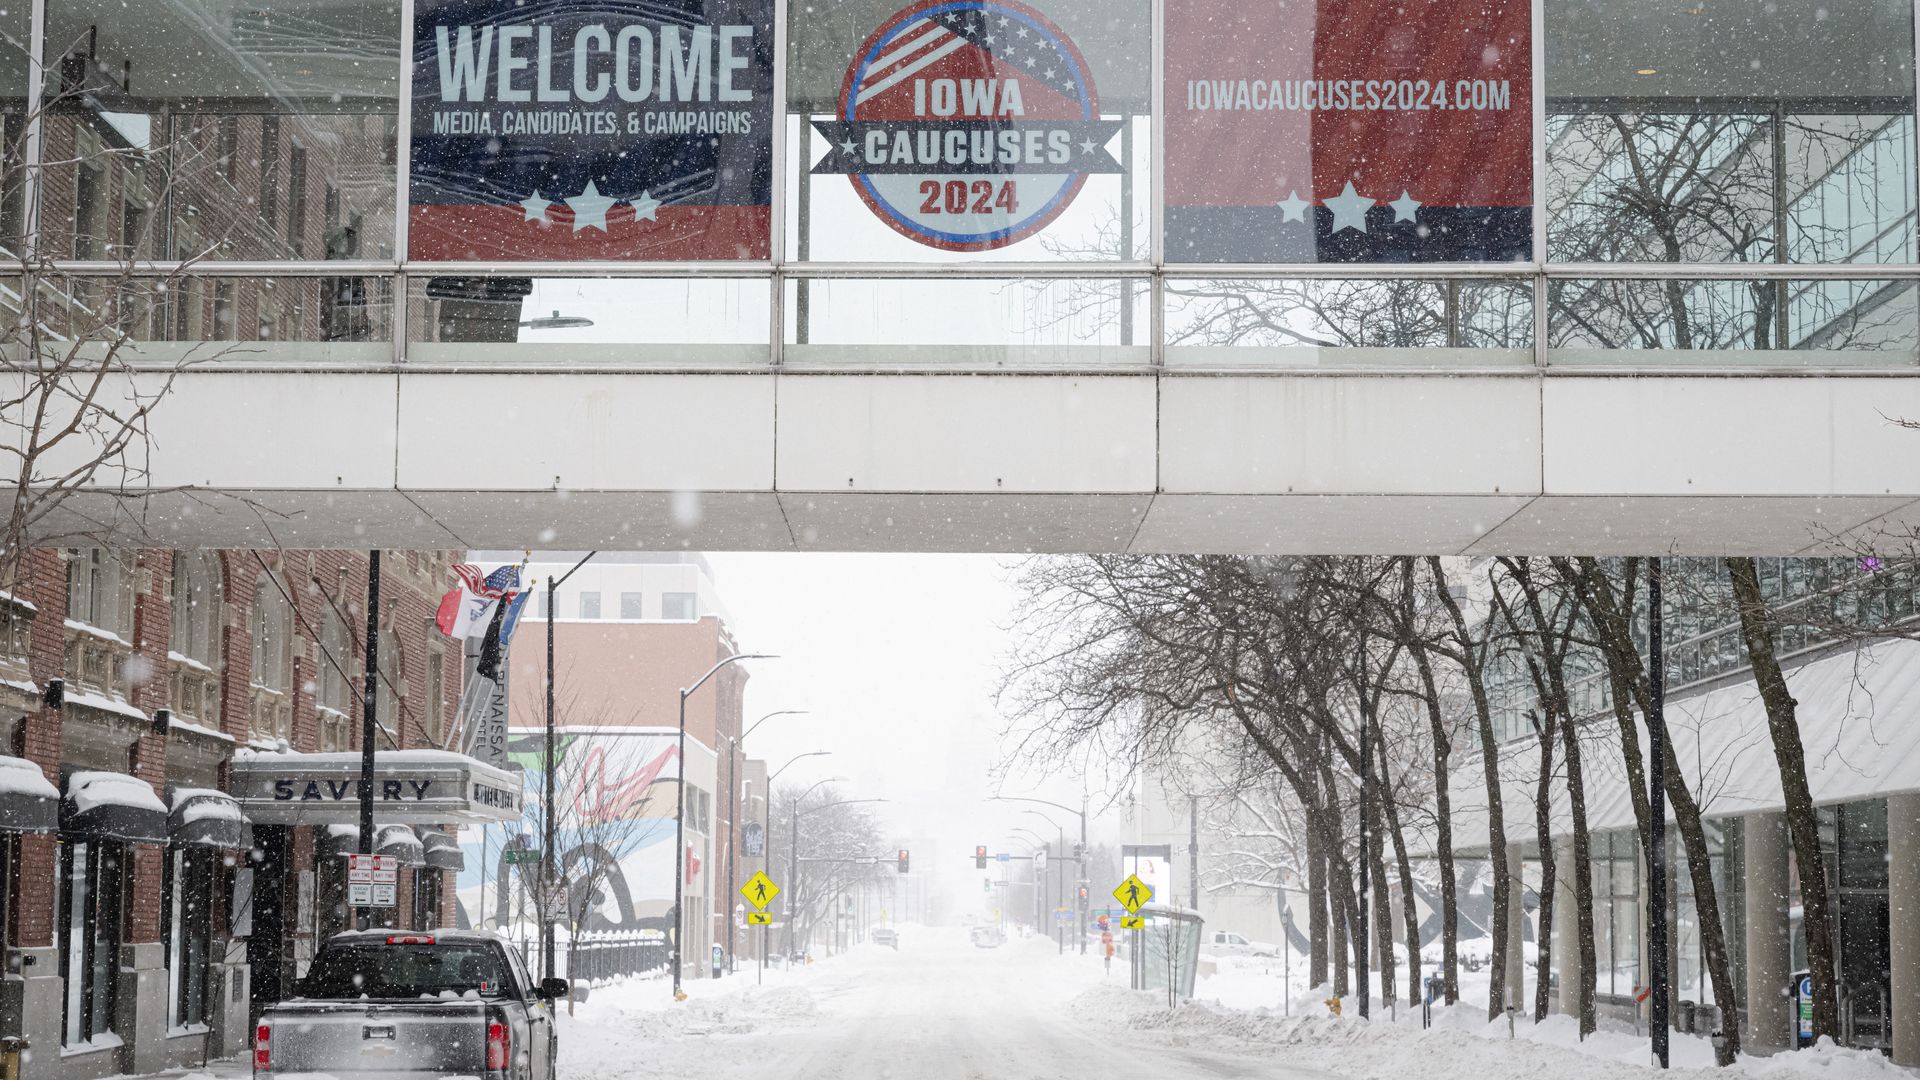  Signage ahead of the Iowa caucus in Des Moines, Iowa, US, on Friday, Jan. 12, 2024.